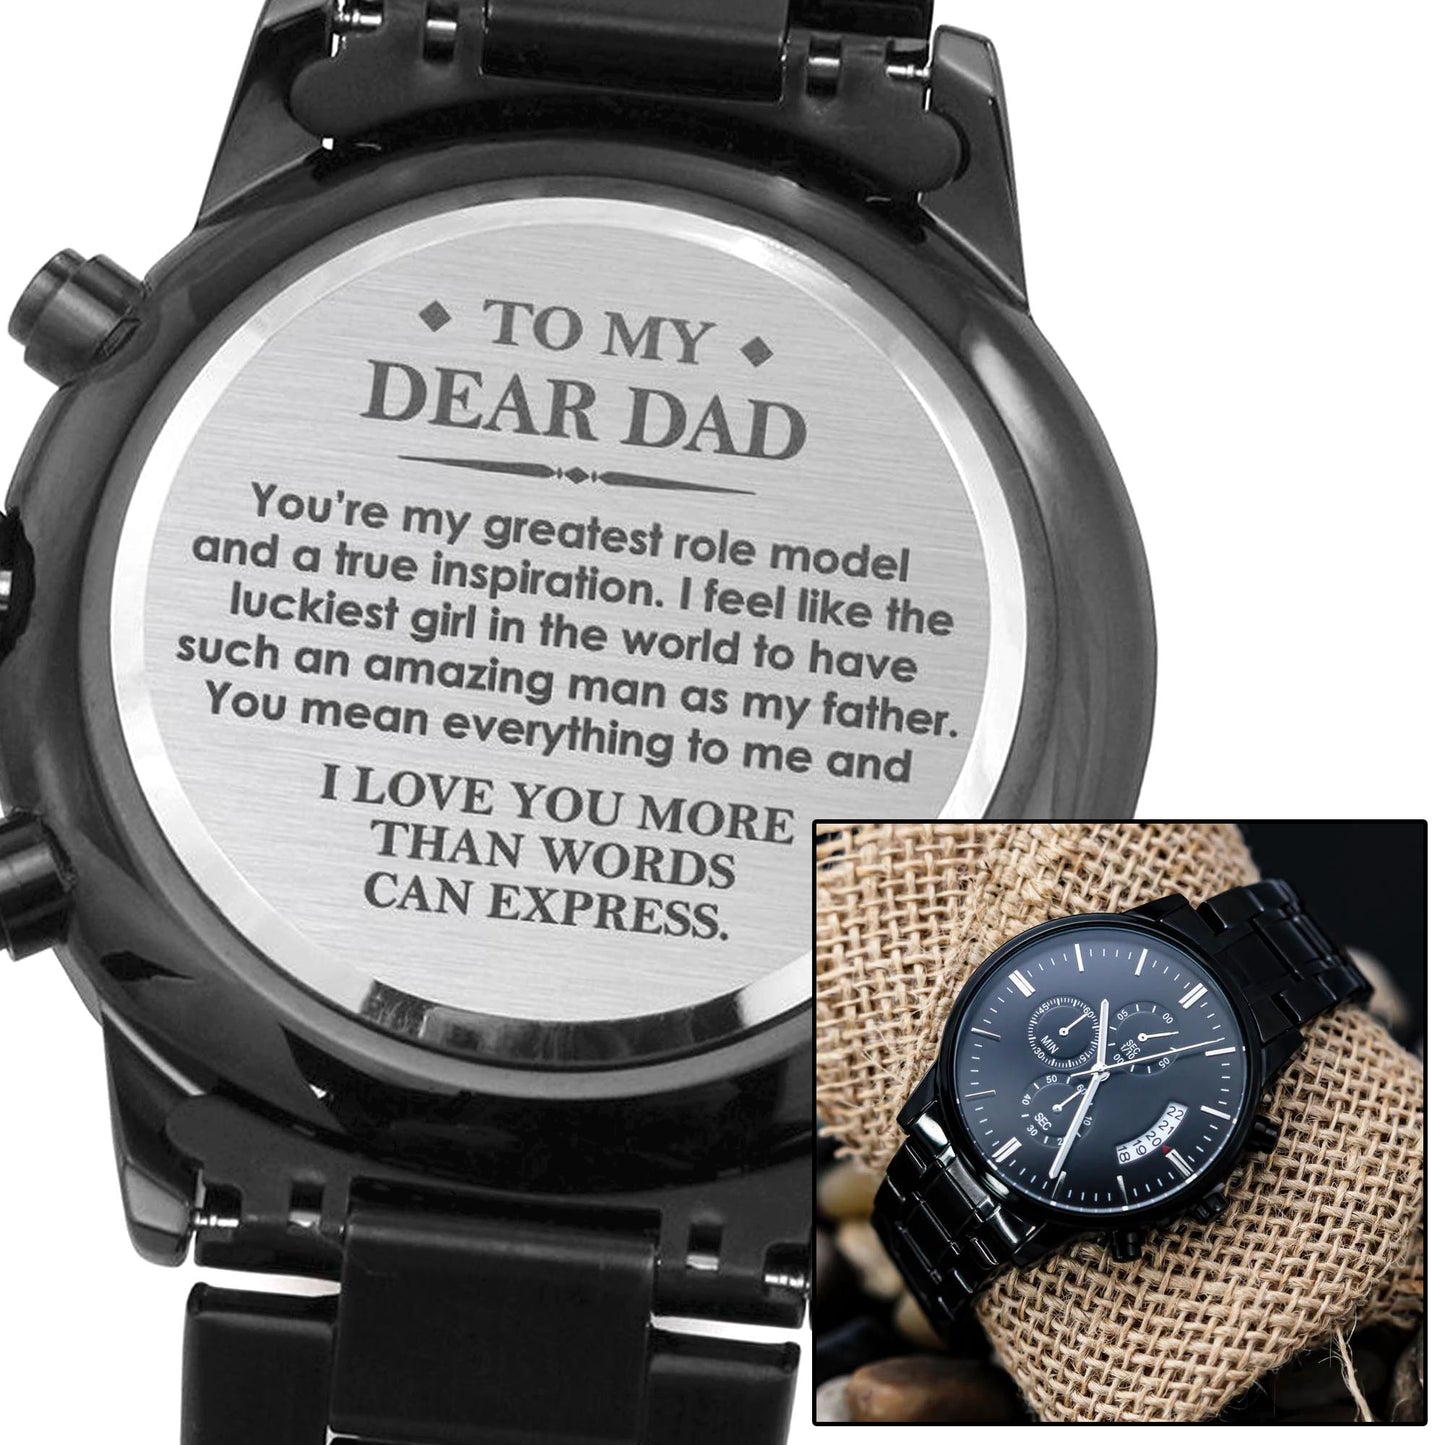 Dear Dad - I Love You More Than Words Can Express